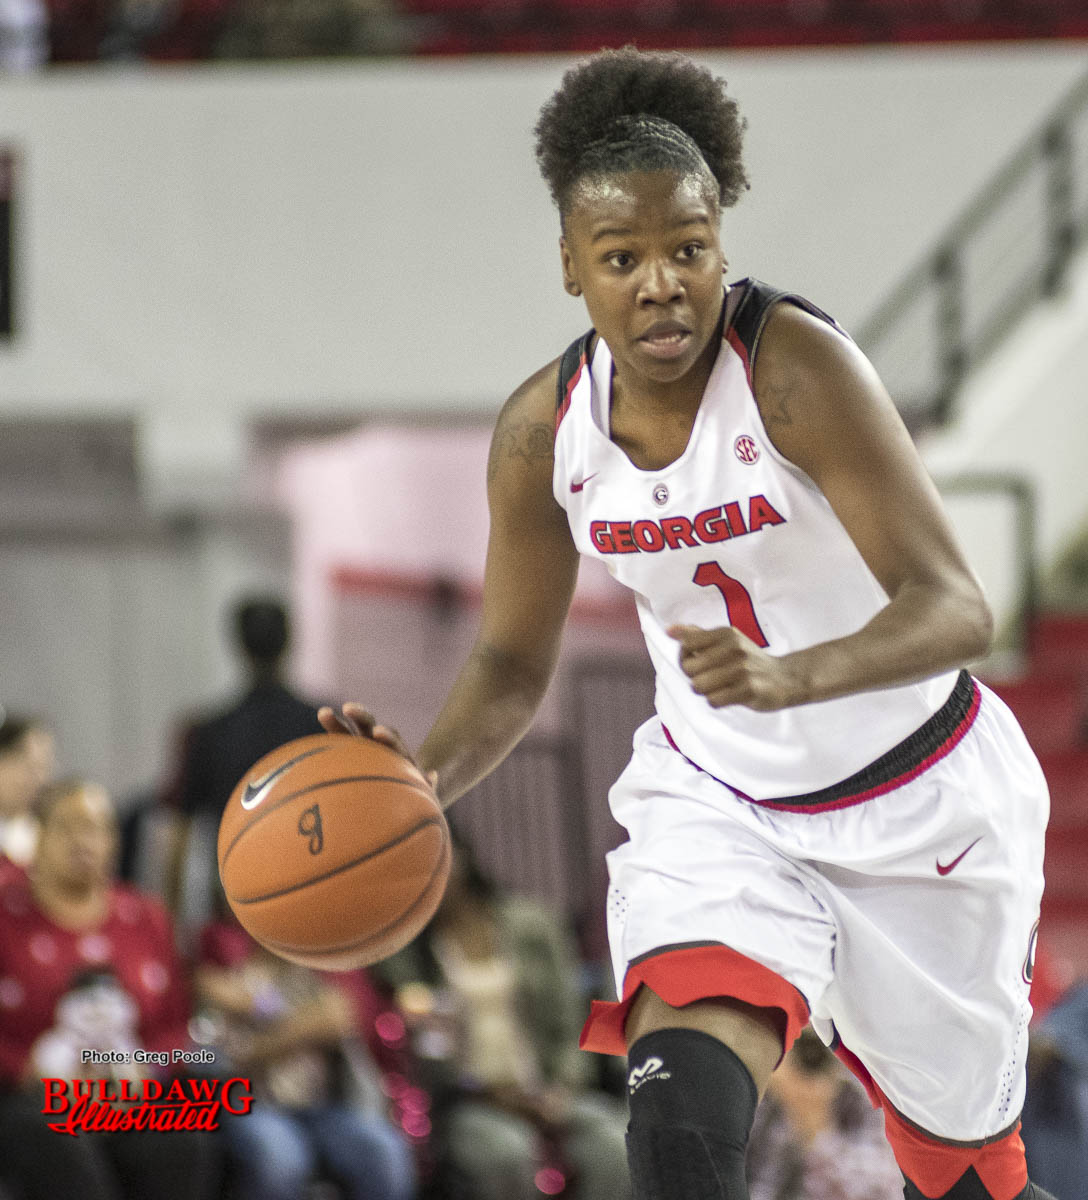 Shanea Armbrister in Action at UGA